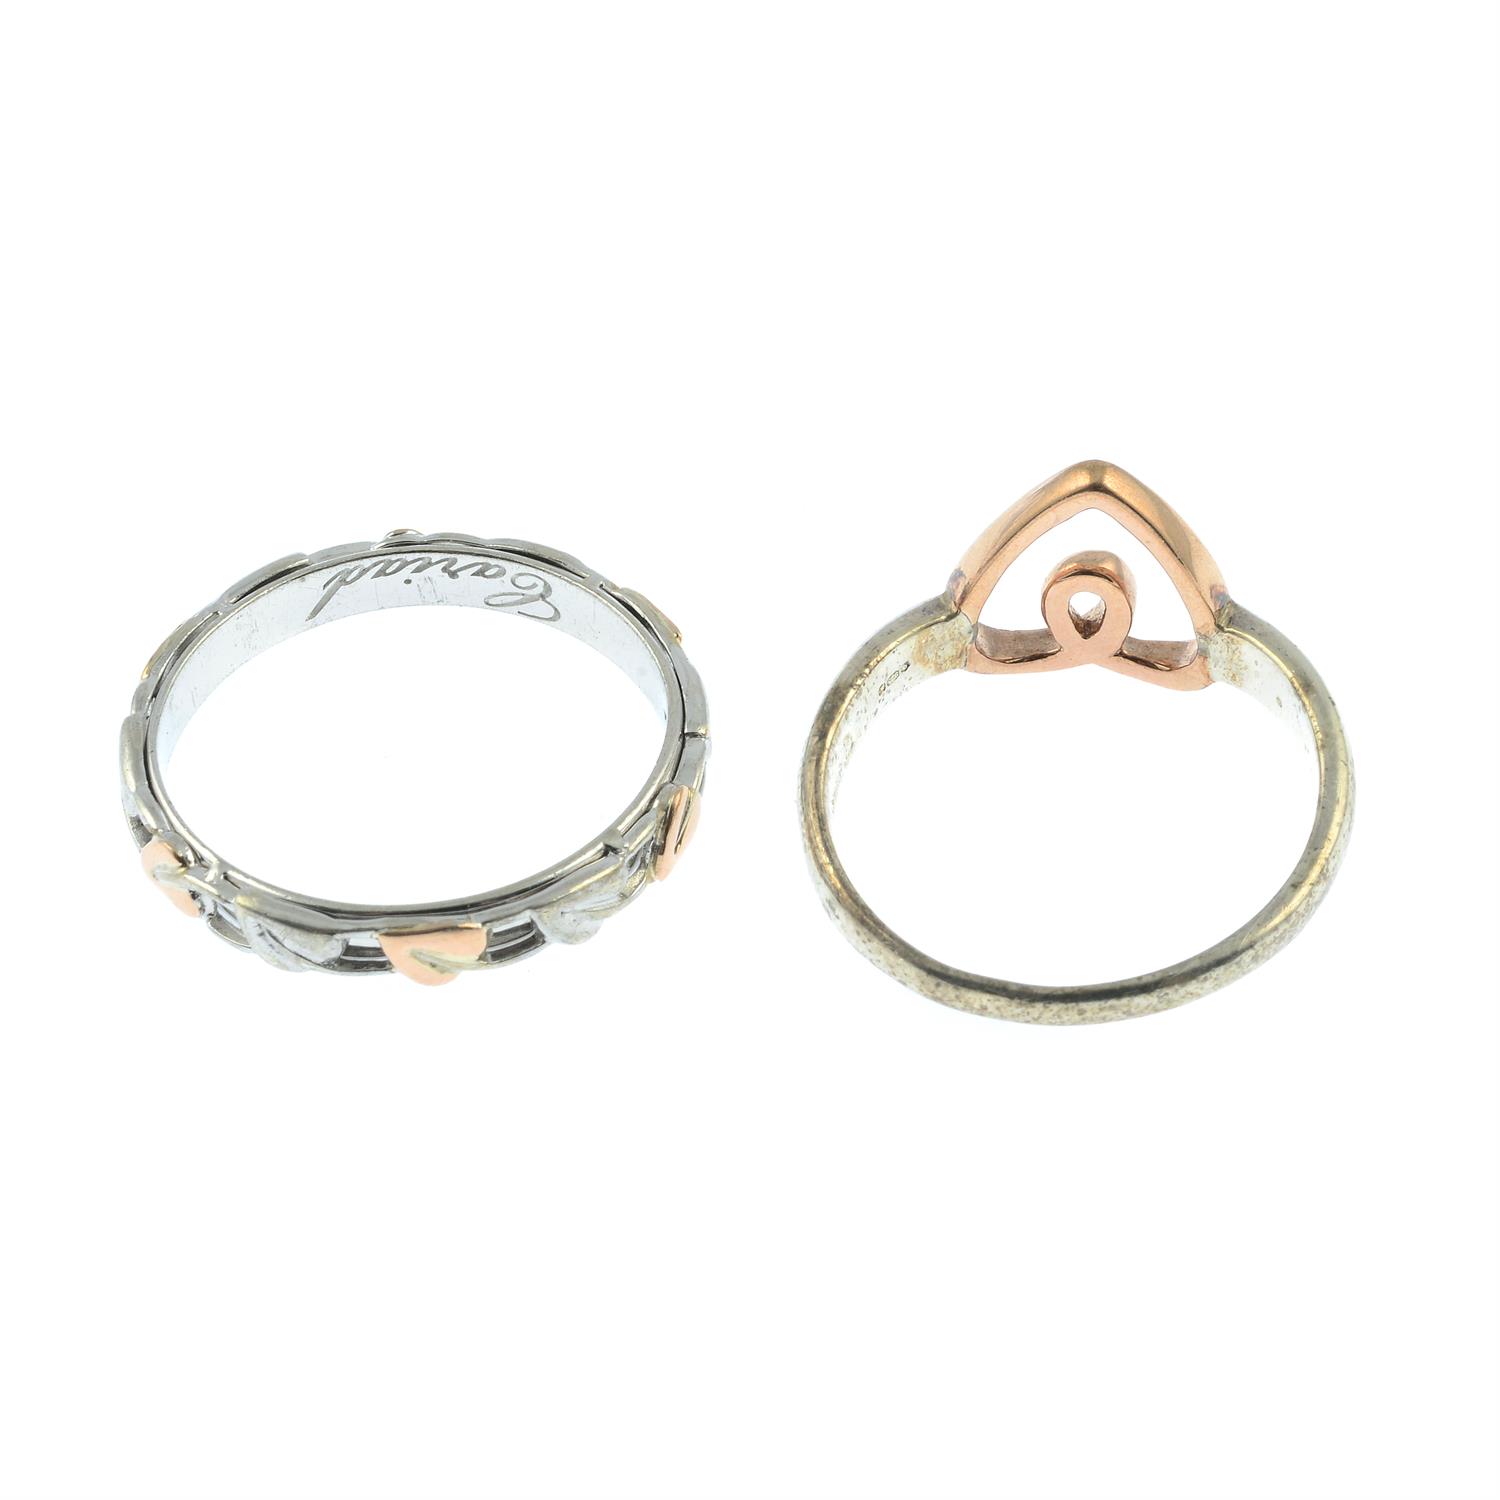 Two silver rings, by Clogau. - Image 2 of 2